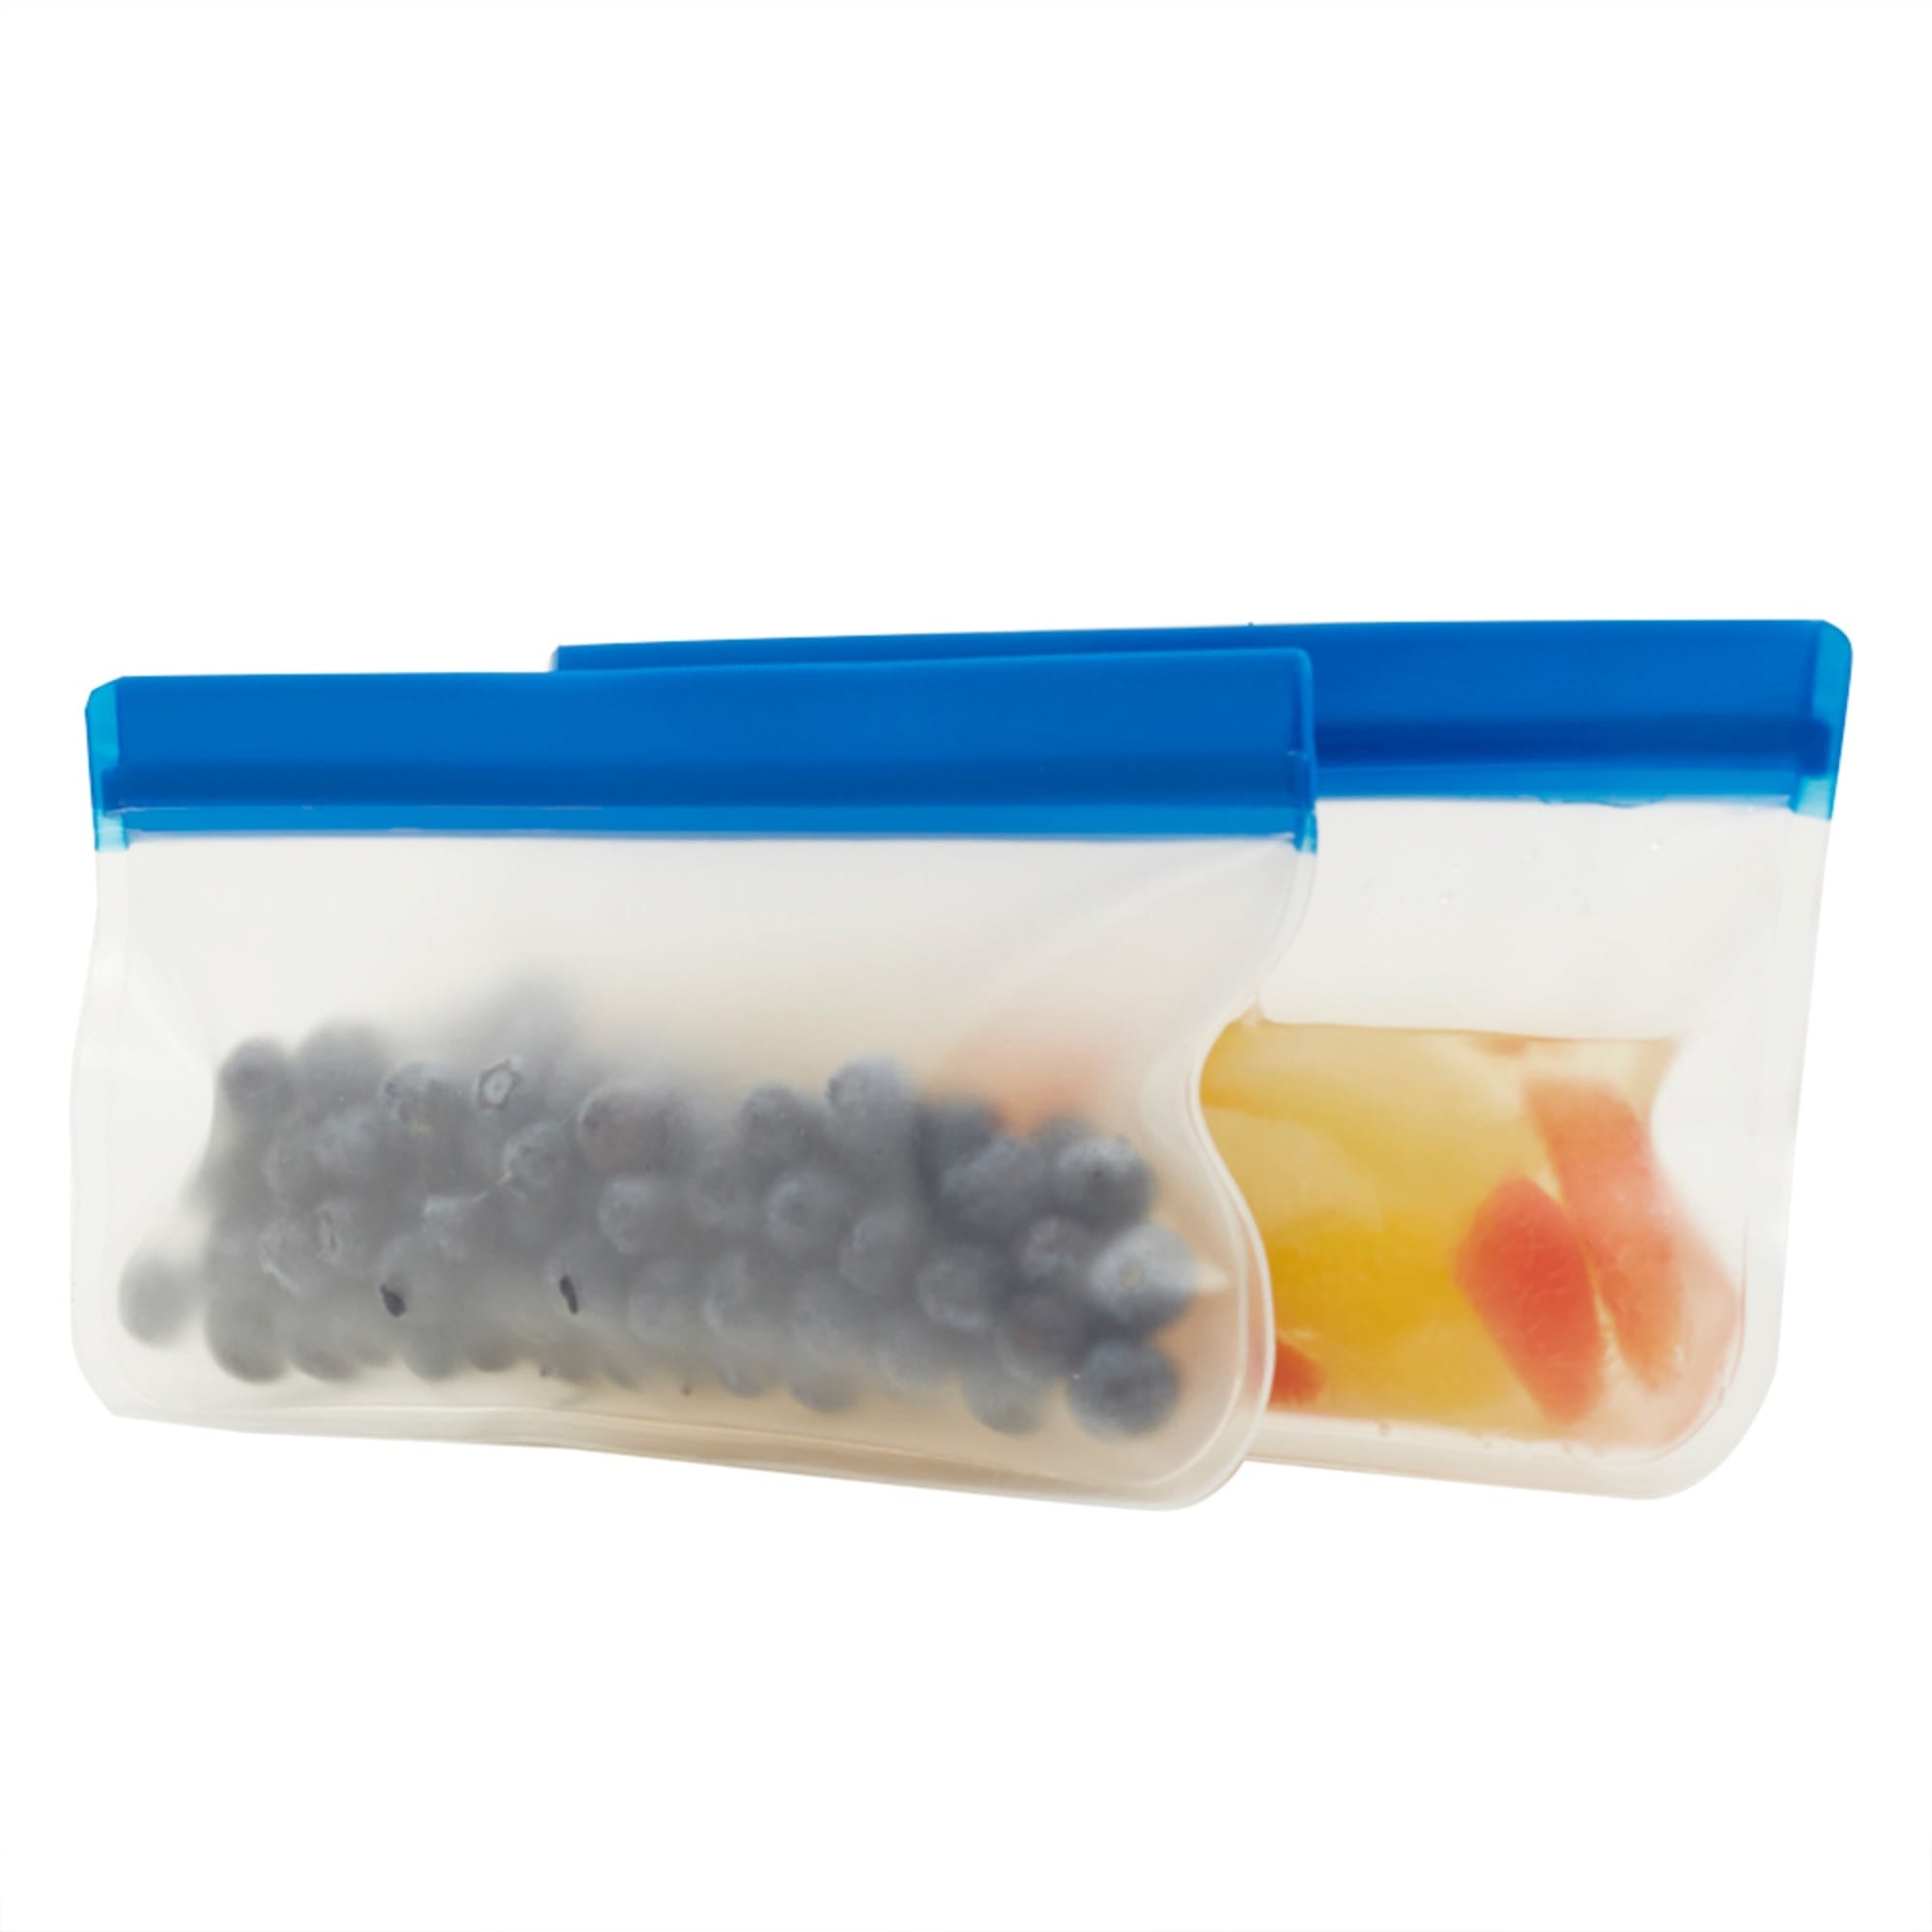 Home Basics 2 Piece Reusable 4" x 8" PEVA Food Bags, Clear $2.00 EACH, CASE PACK OF 24